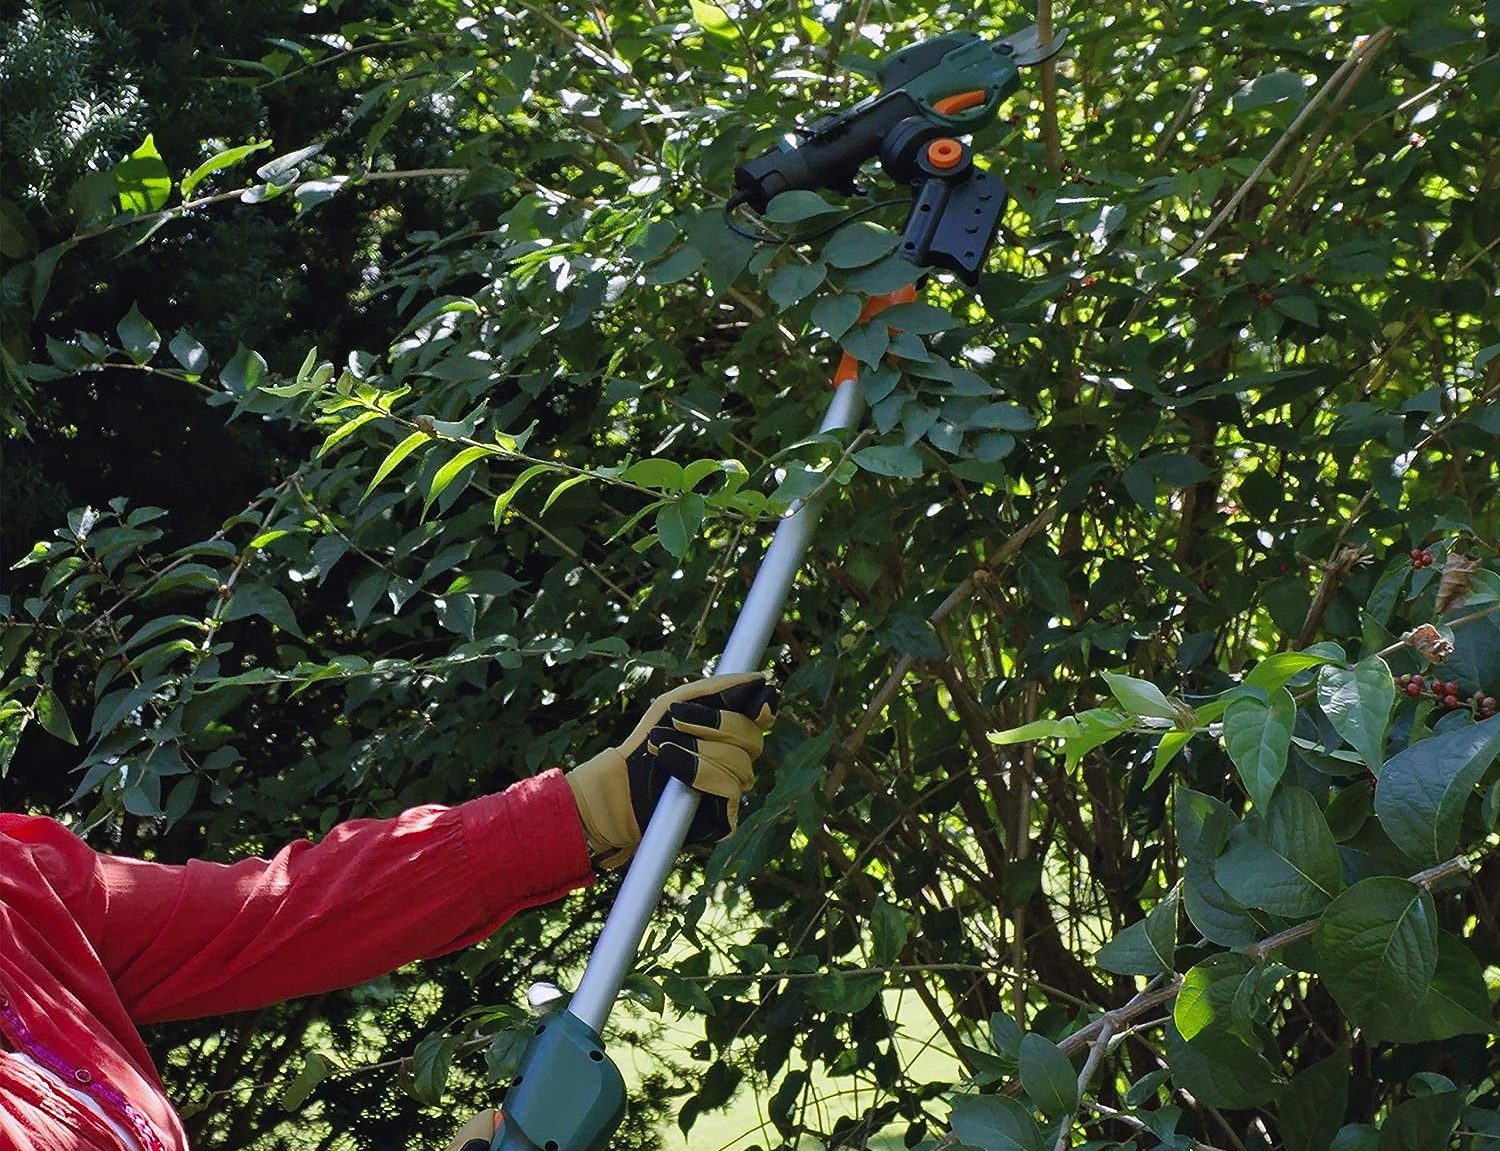 Quality electric pruning shears are designed to provide precise and clean cuts with minimal effort.